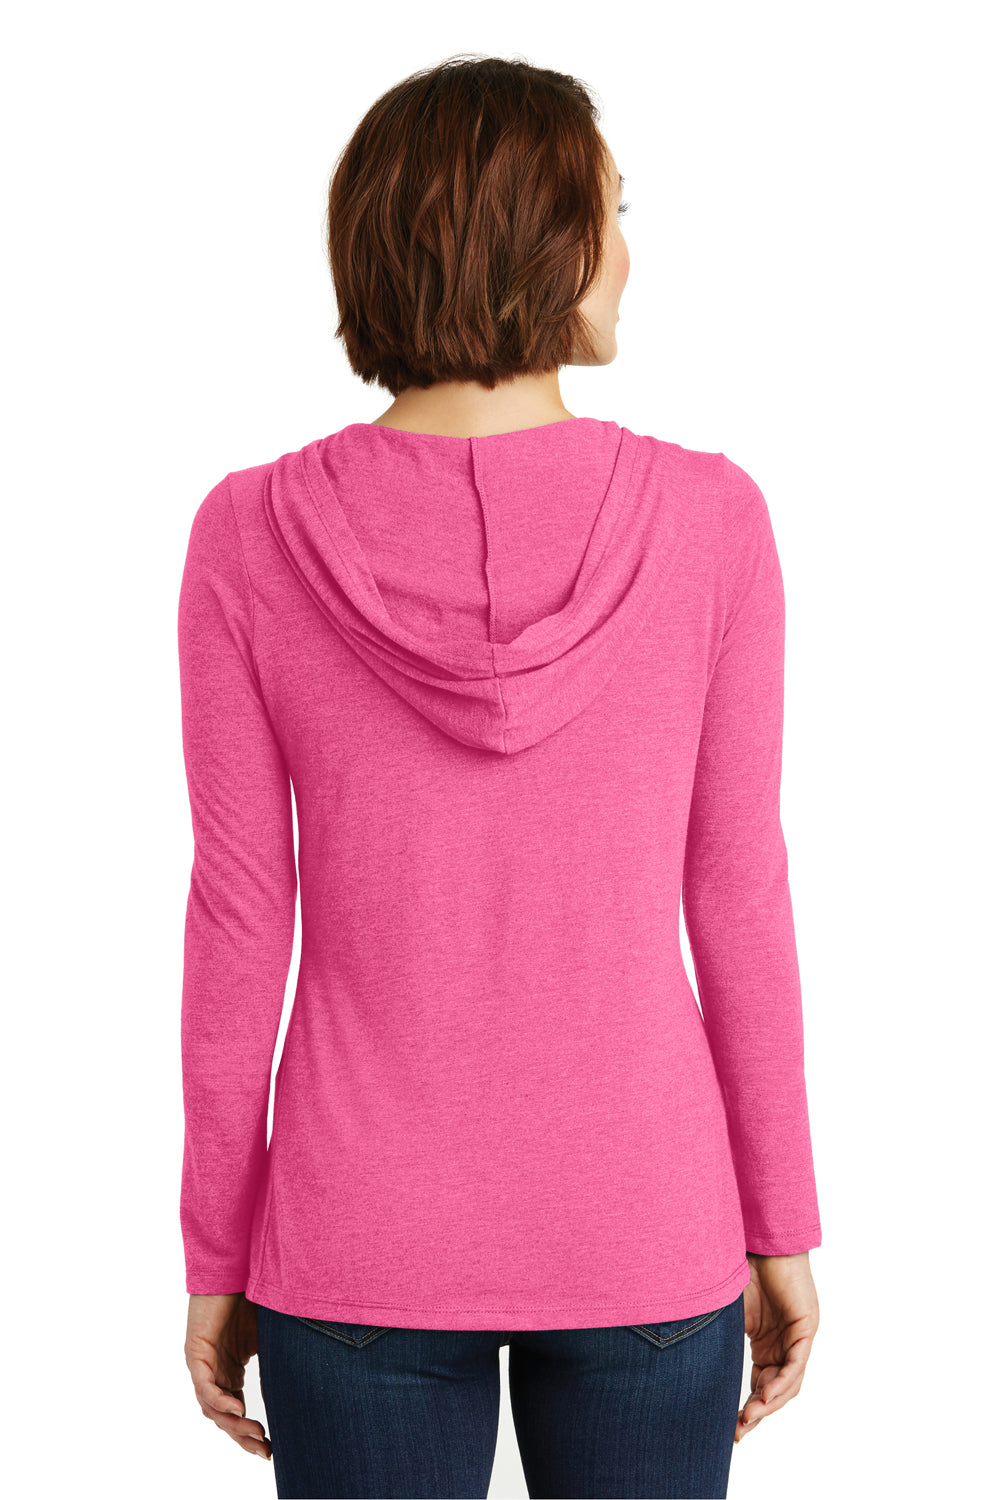 District DM139L Womens Perfect Tri Long Sleeve Hooded T-Shirt Hoodie Fuchsia Pink Frost Back